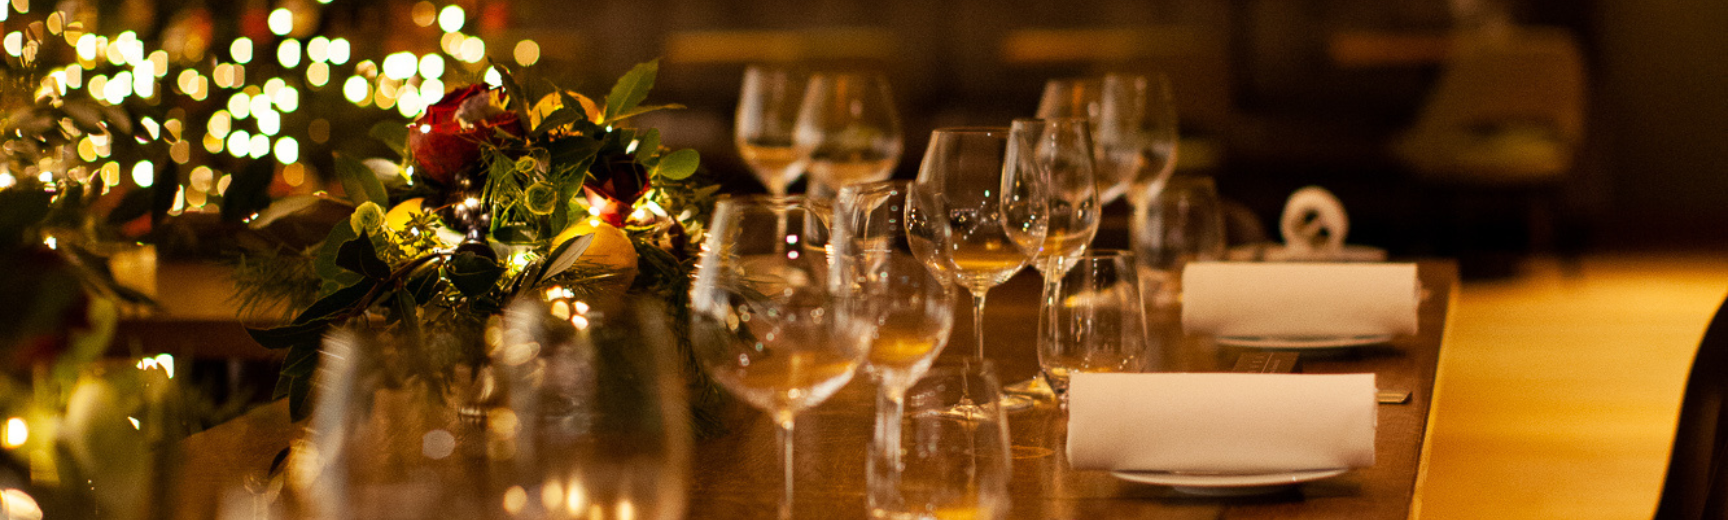 Image of a table laid out for a Christmas dinner party with glasses, winter flowers and Christmas lights in the background